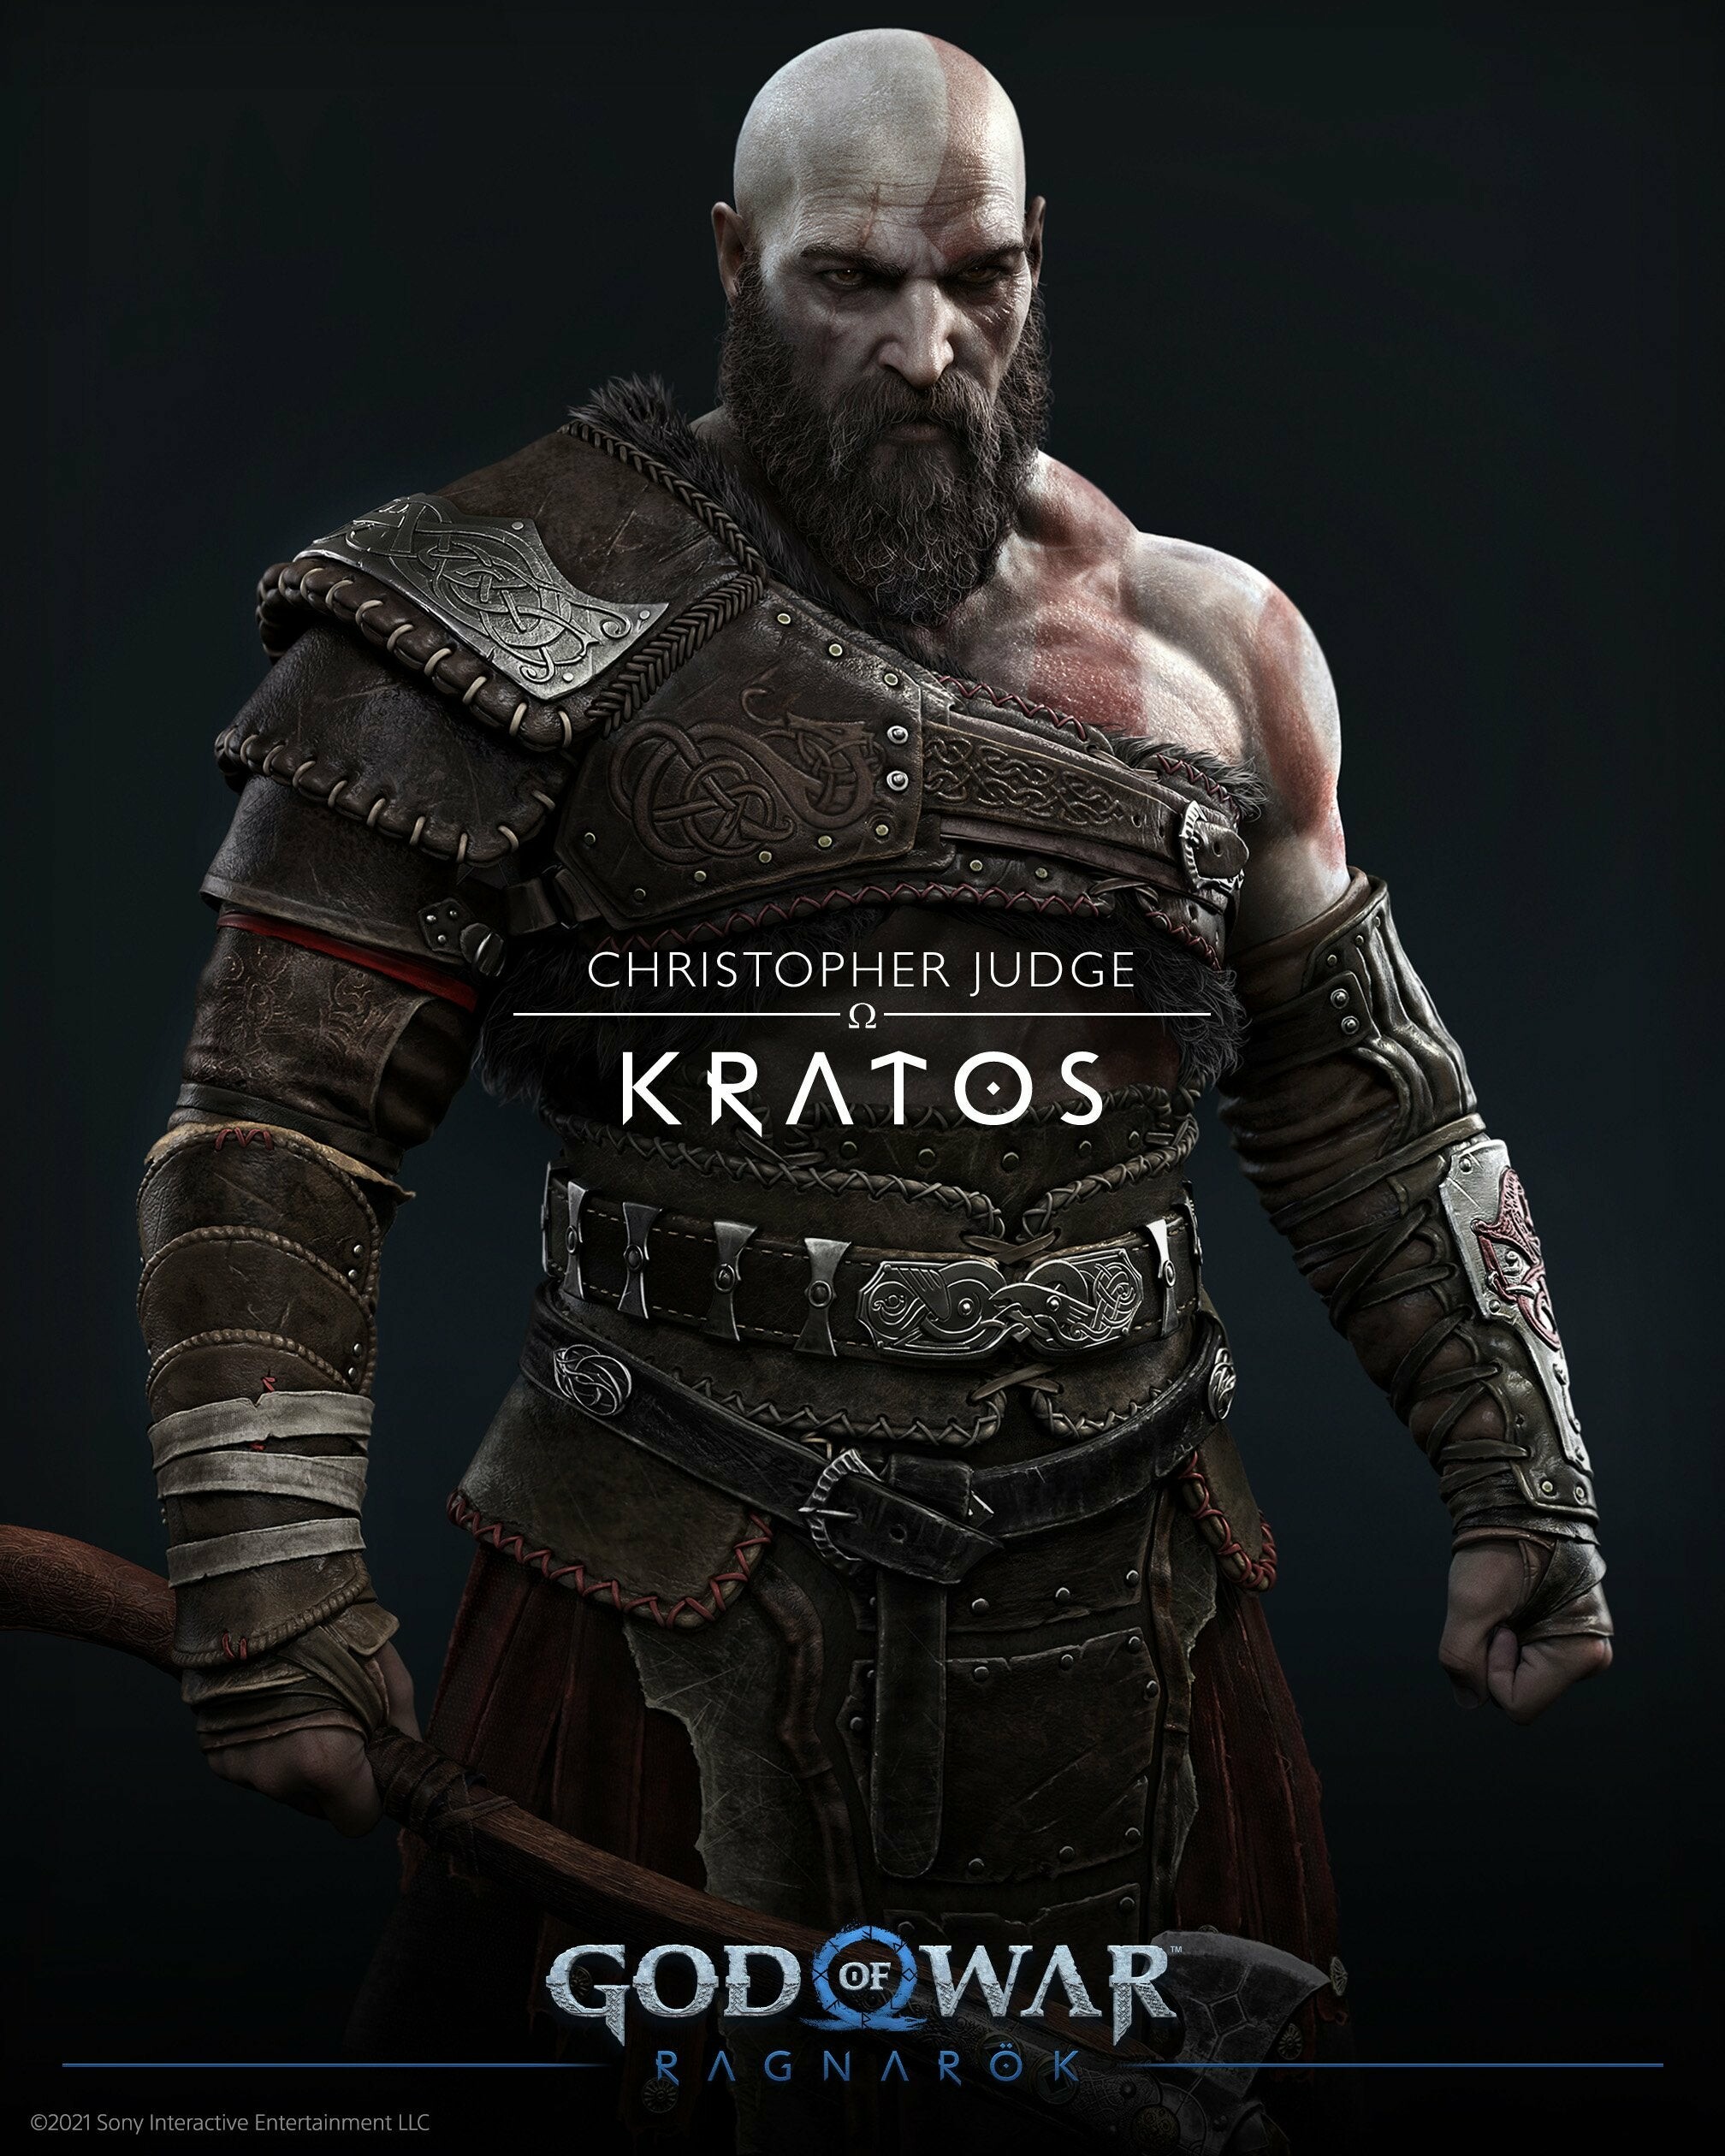 God of War: Ragnarok: The main protagonist is Kratos, played by Christopher Judge. 2020x2520 HD Wallpaper.